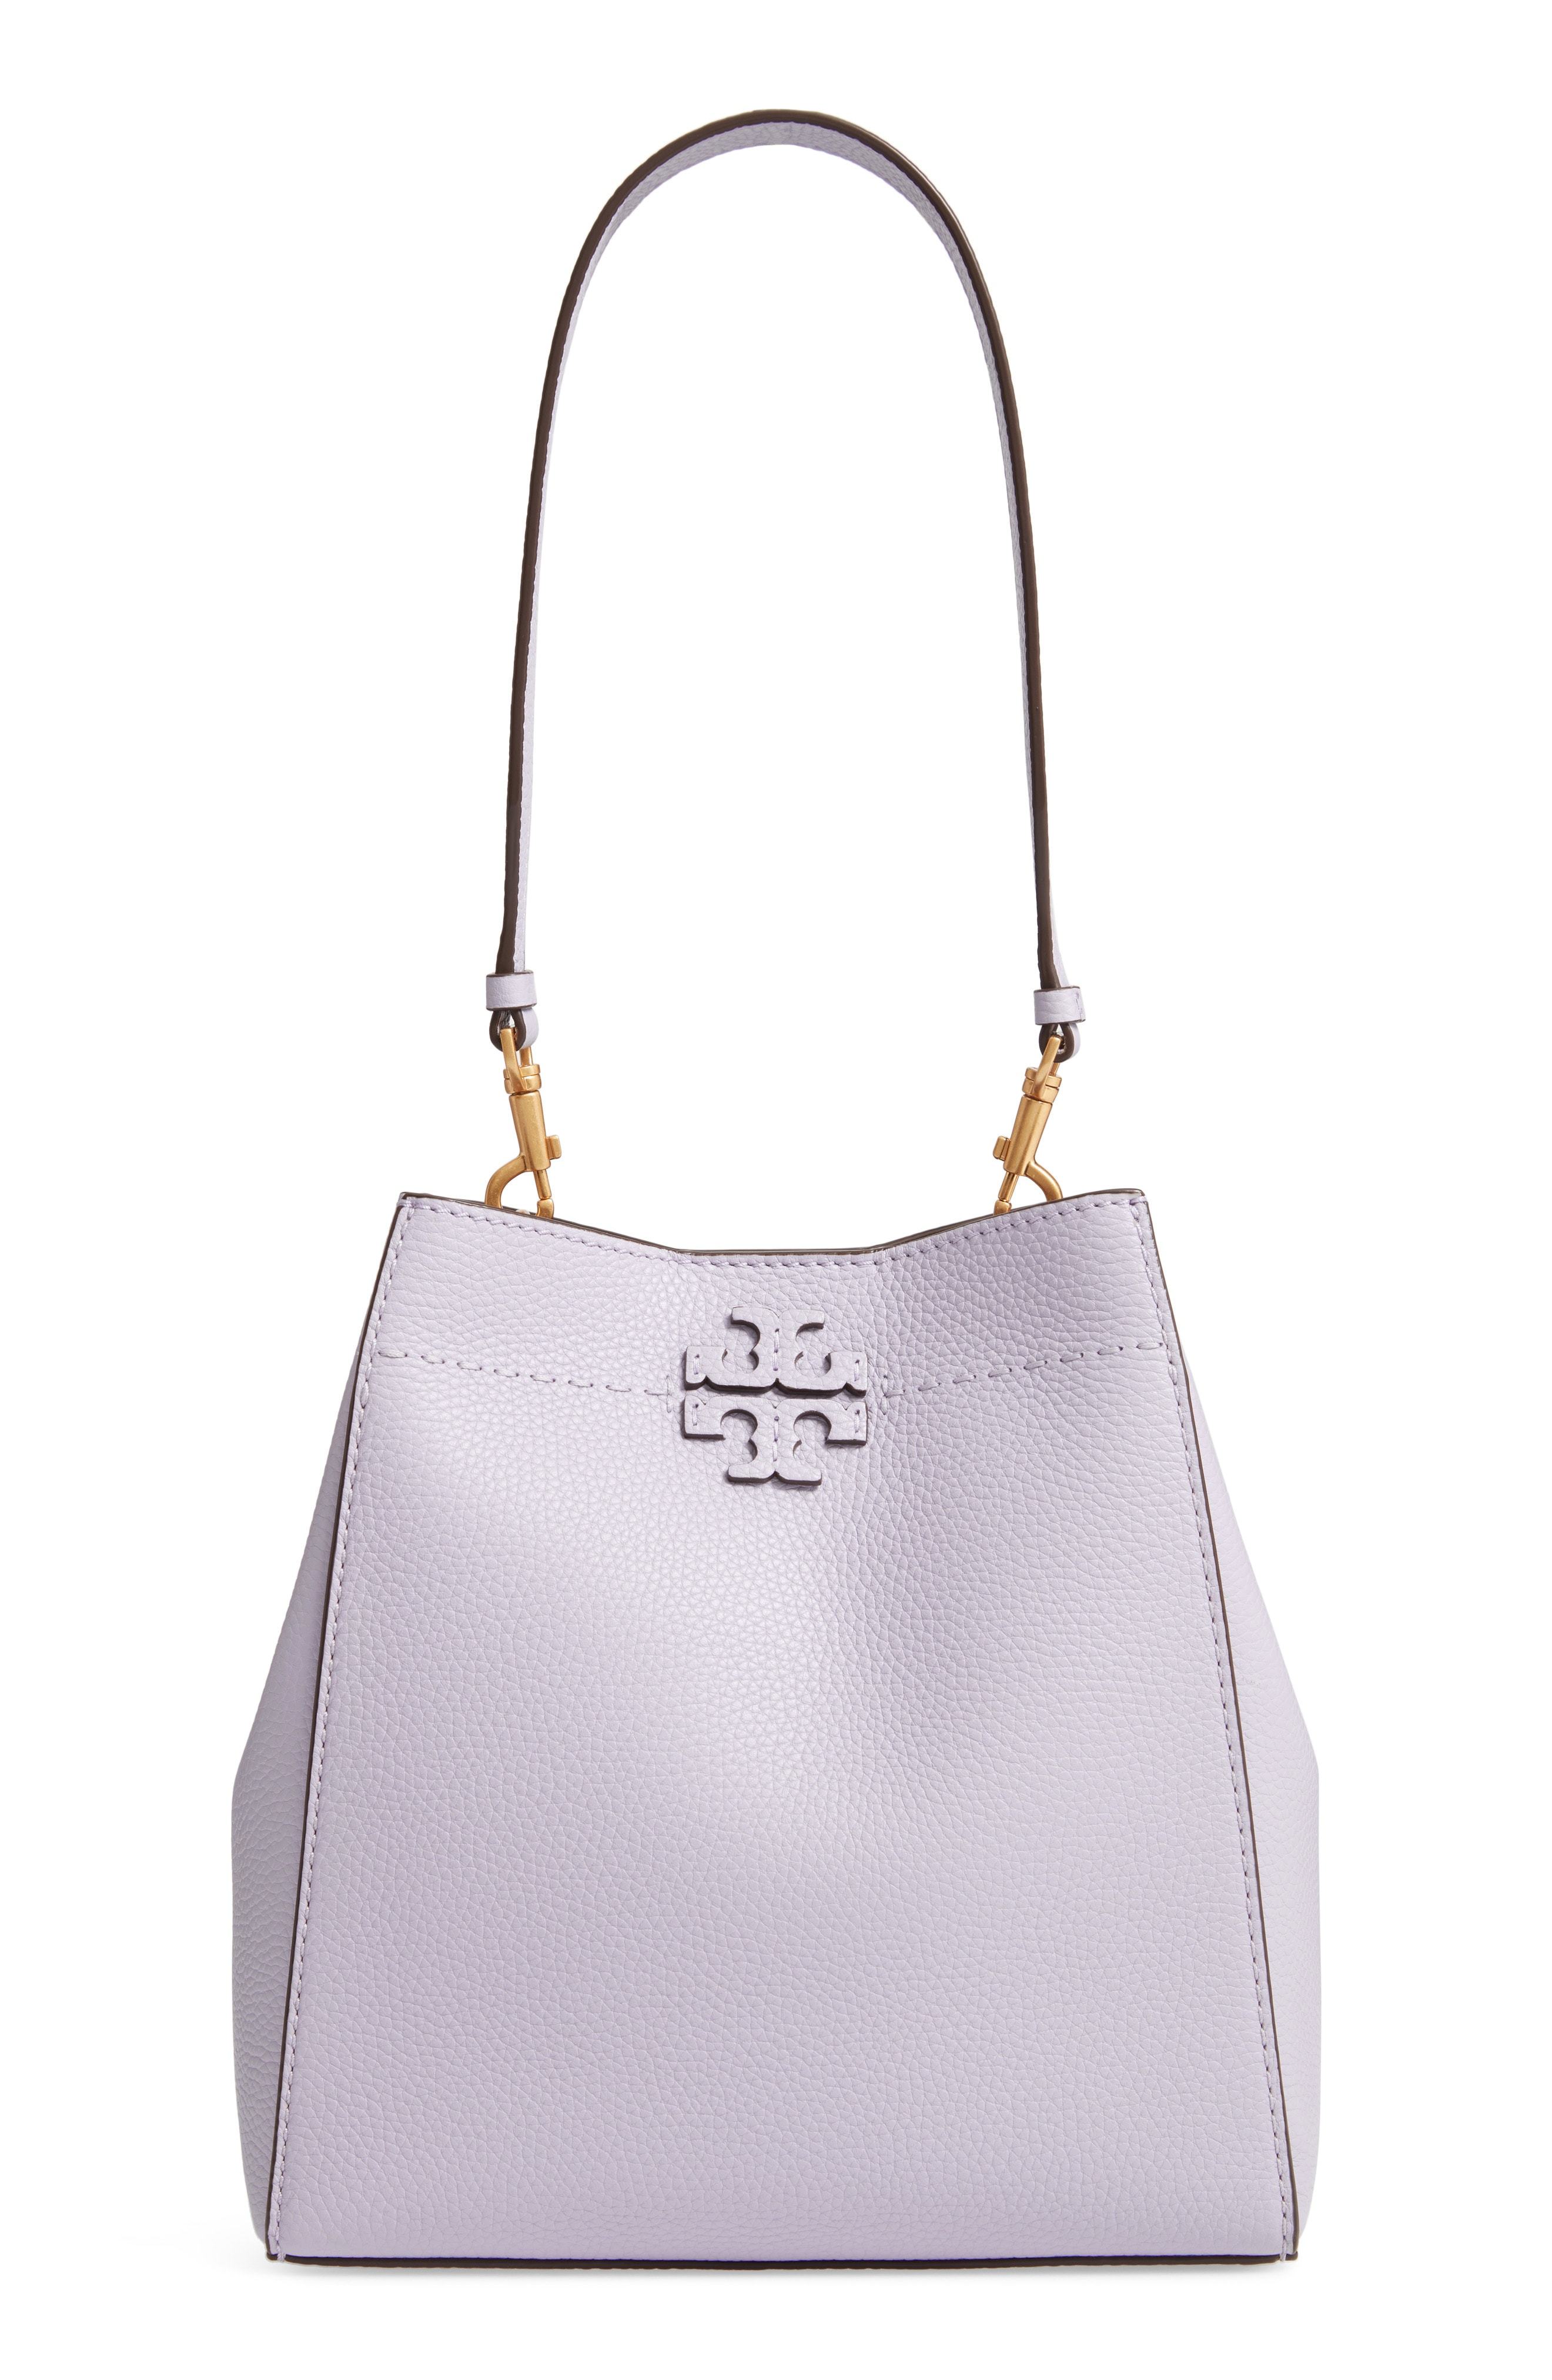 Tory Burch Mcgraw Leather Hobo, $398 | Nordstrom | Lookastic